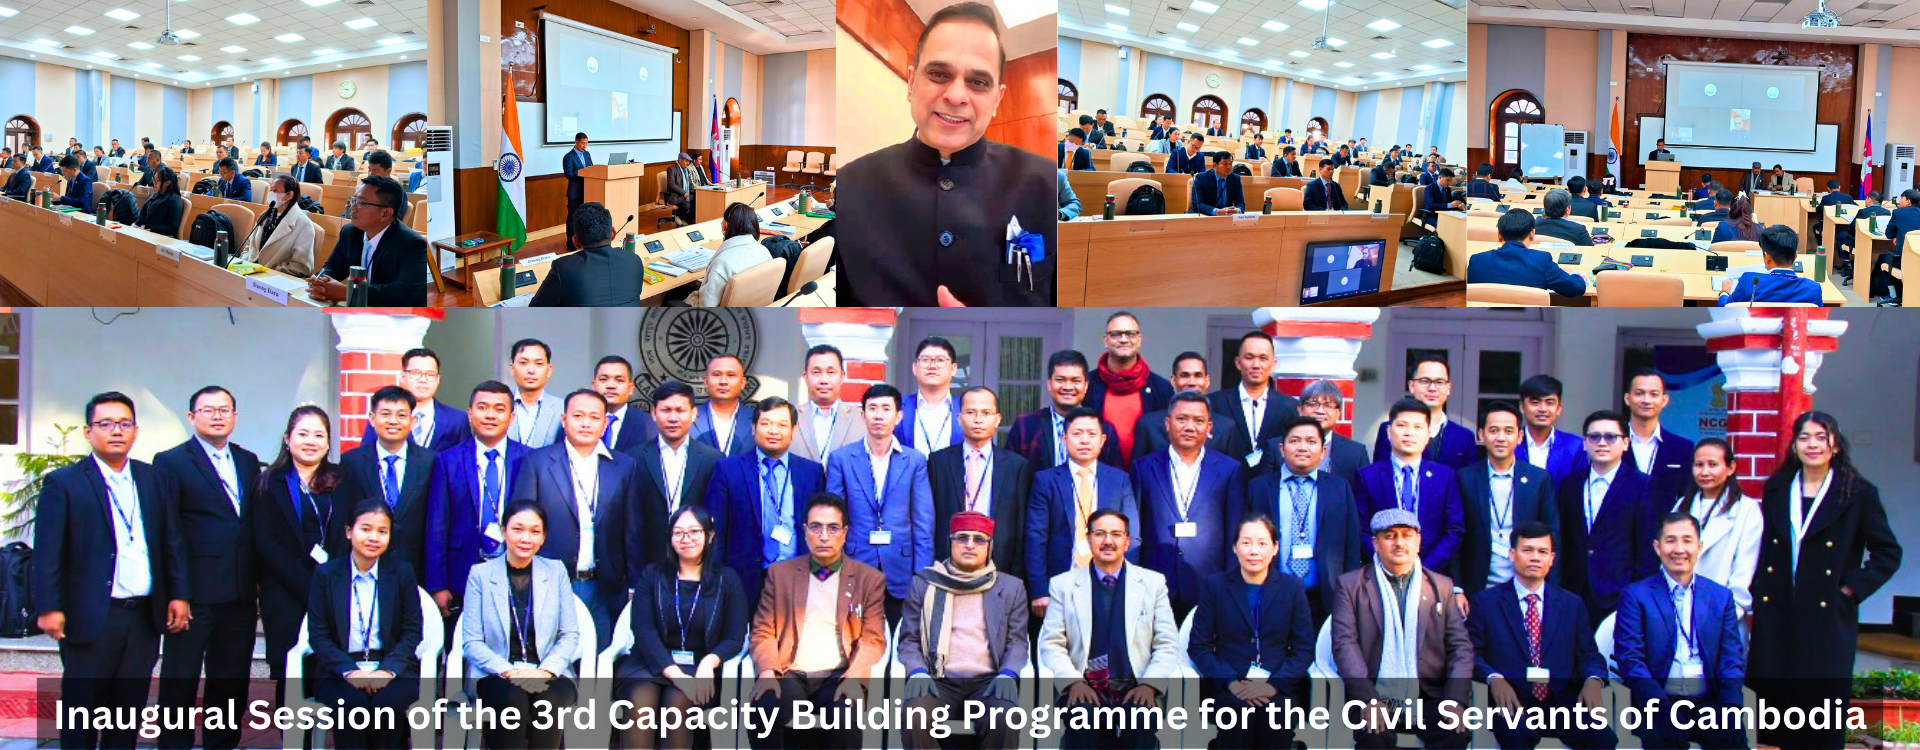 Inaugural Session of the 3rd Capacity Building Programme for the Civil Servants of Cambodia